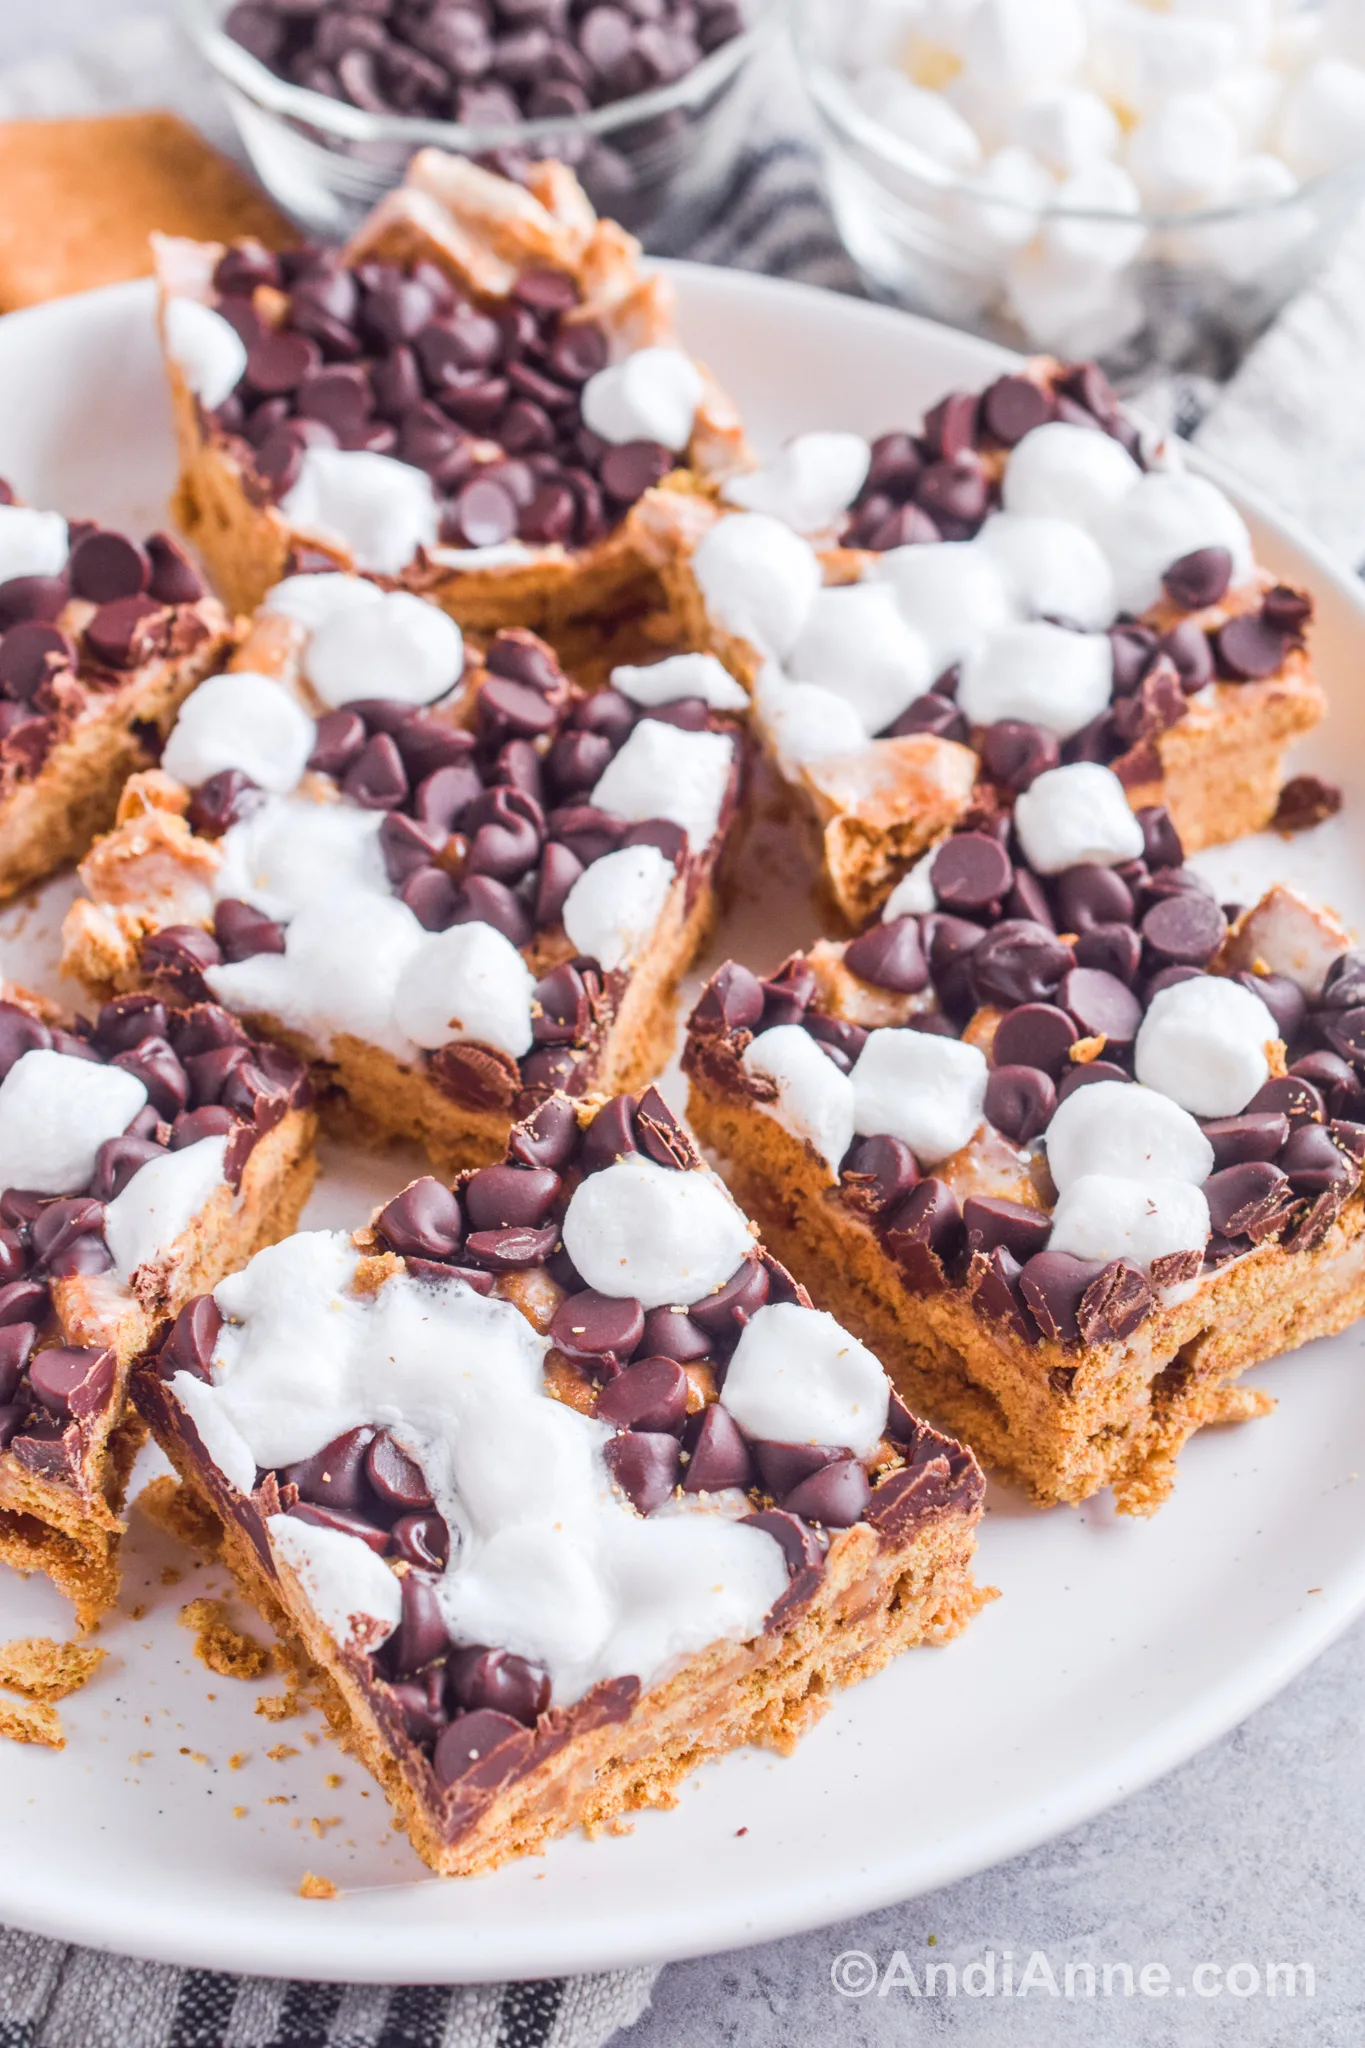 A plate of s'more bars with chocolate chips and marshmallows on top. A bowl of chocolate chips and marshmallows blurred in background.